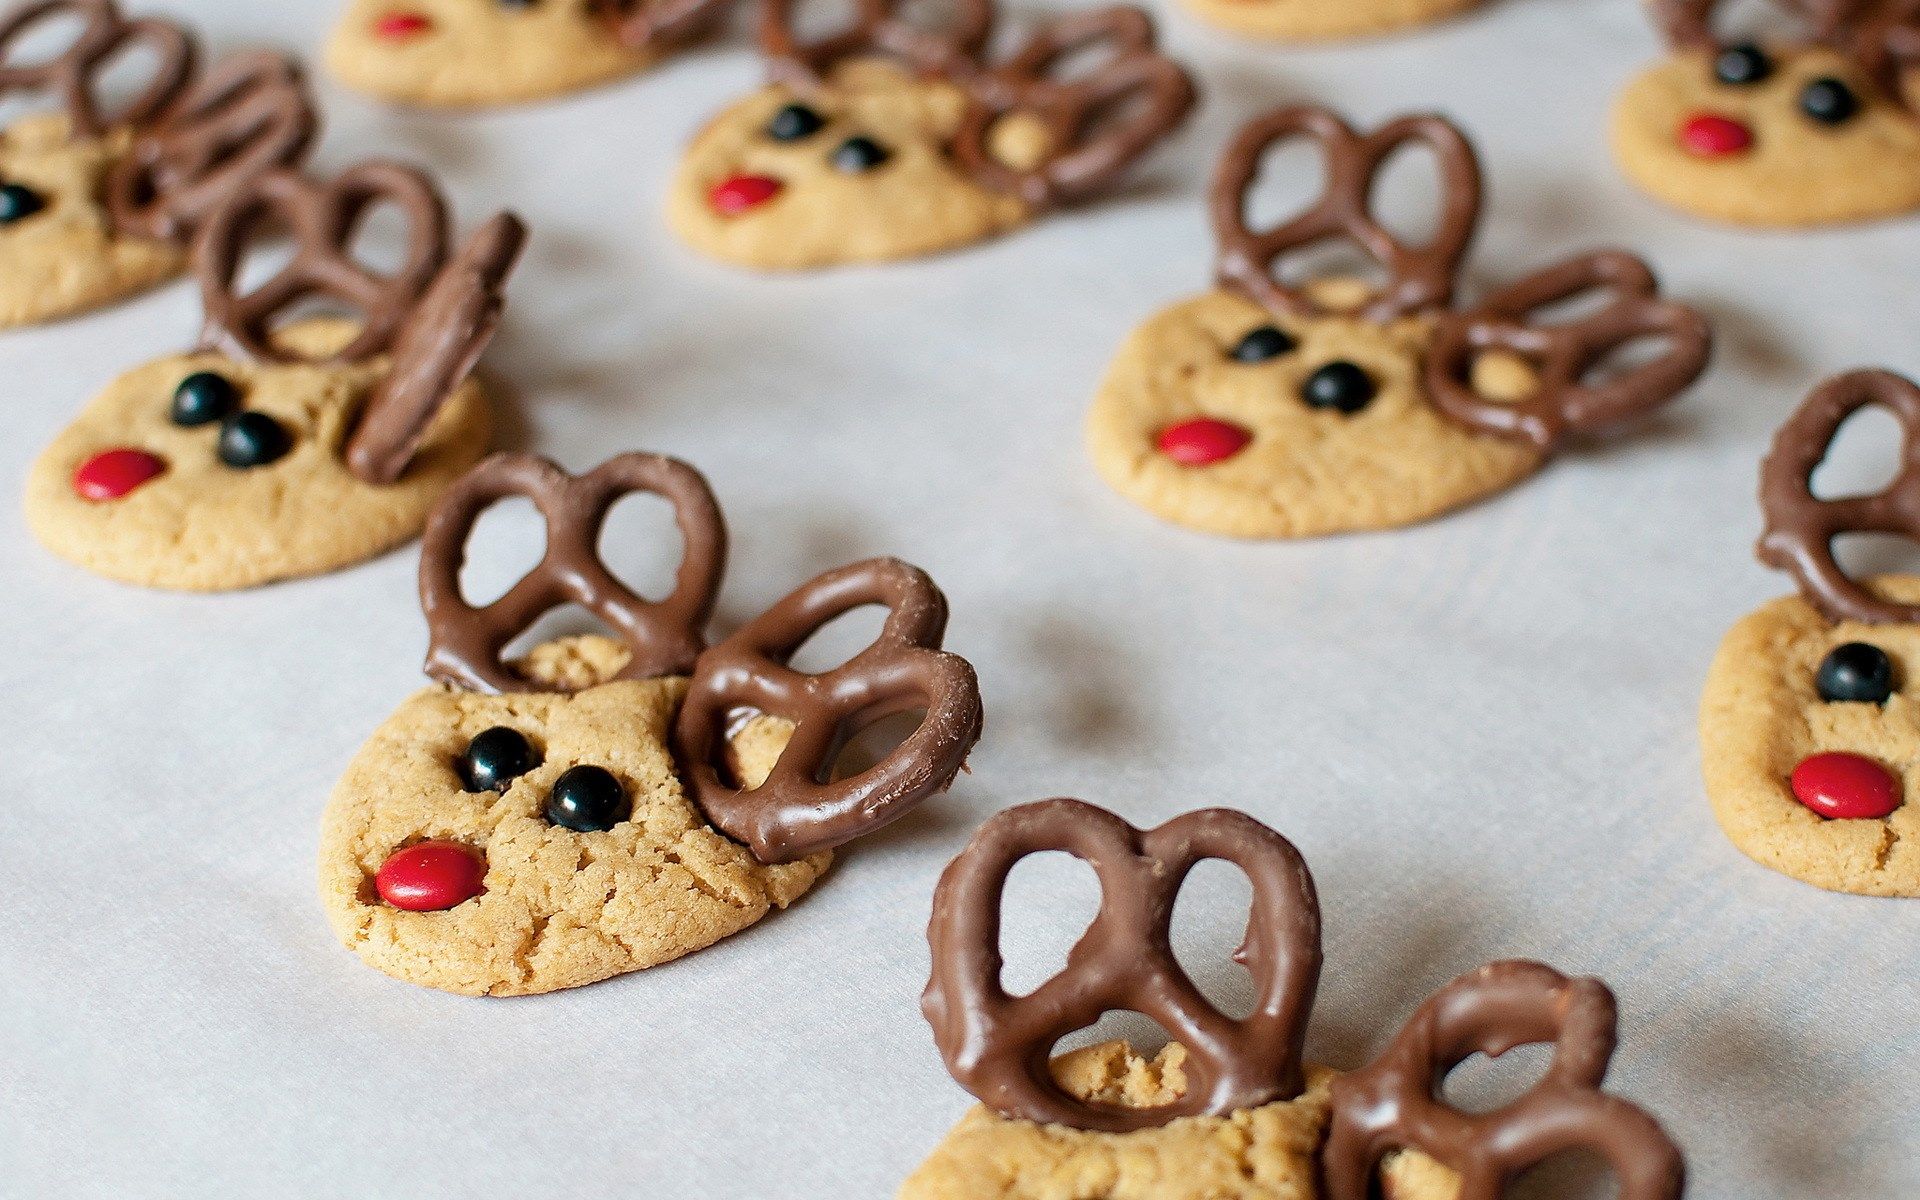 Adorable face of reindeer cooked by chocolate hd 1080p